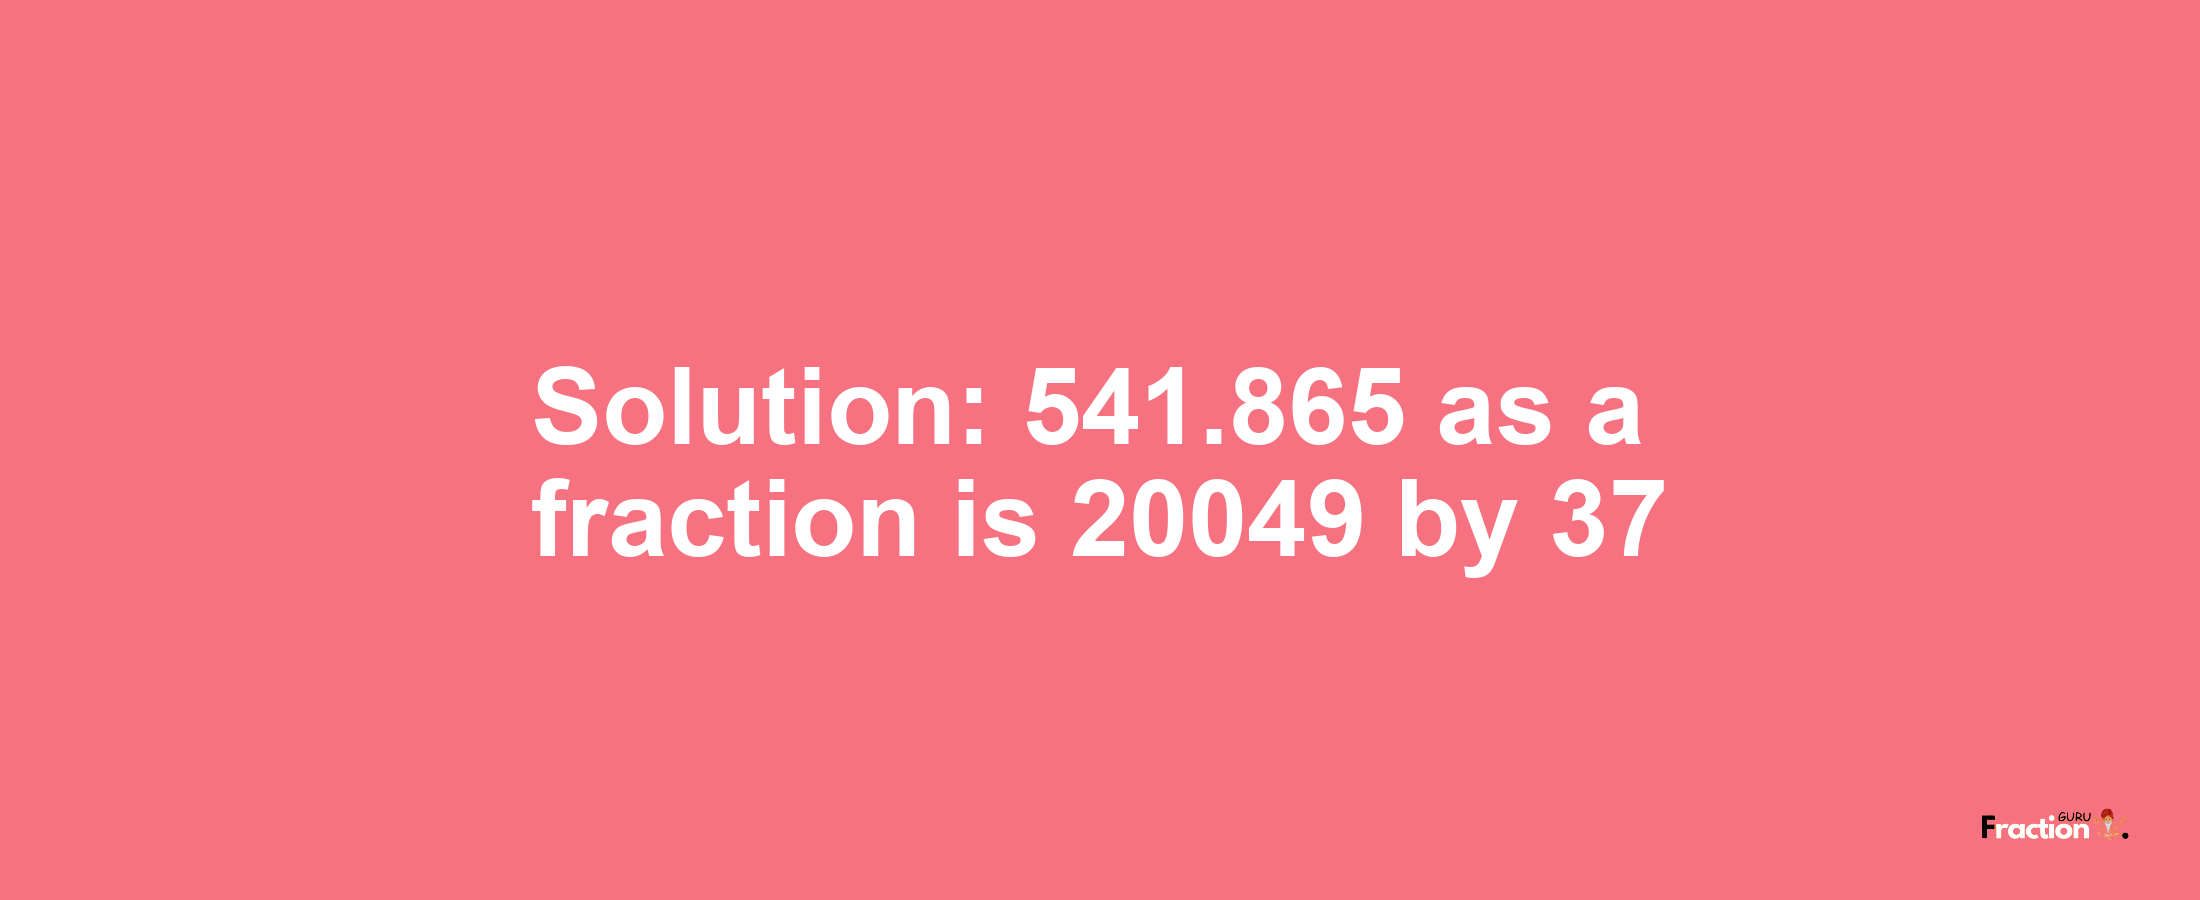 Solution:541.865 as a fraction is 20049/37